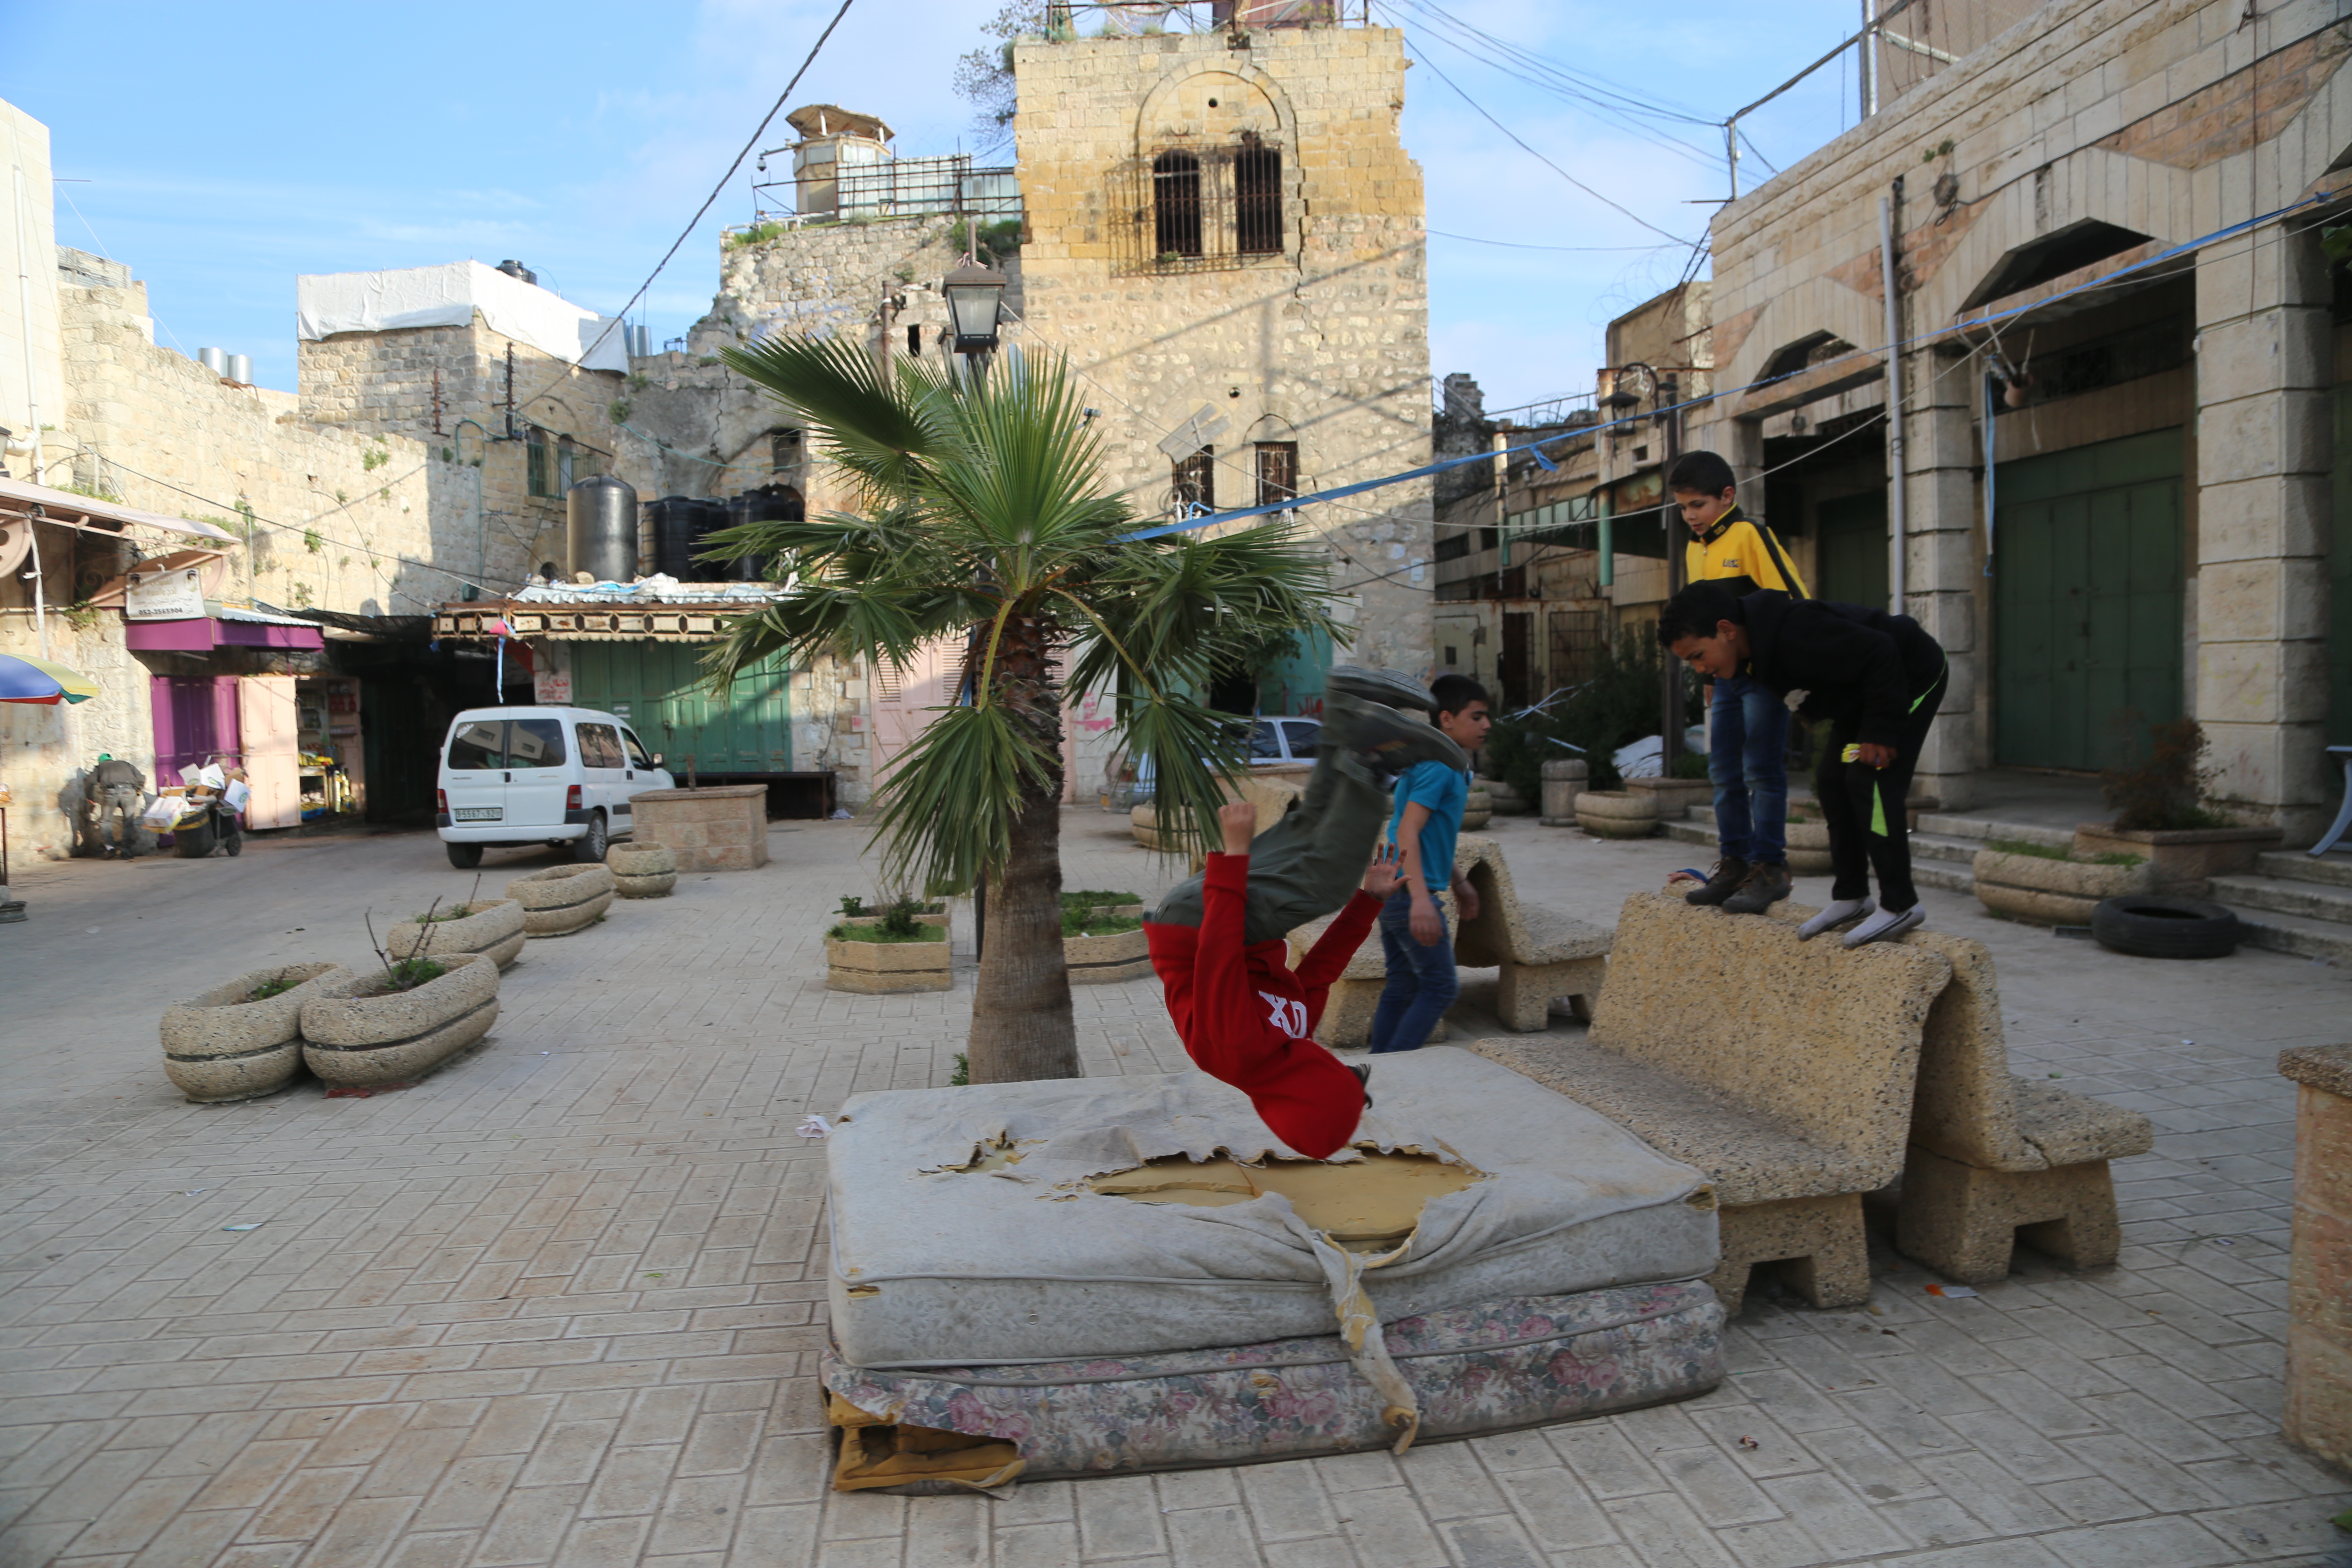 Palestinian kids play in Hebron feet away from Israeli settlements and the gated-up Shuhada Street, the former commercial hub of the city that was closed after the 1994 Ibrahimi Mosque massacre.